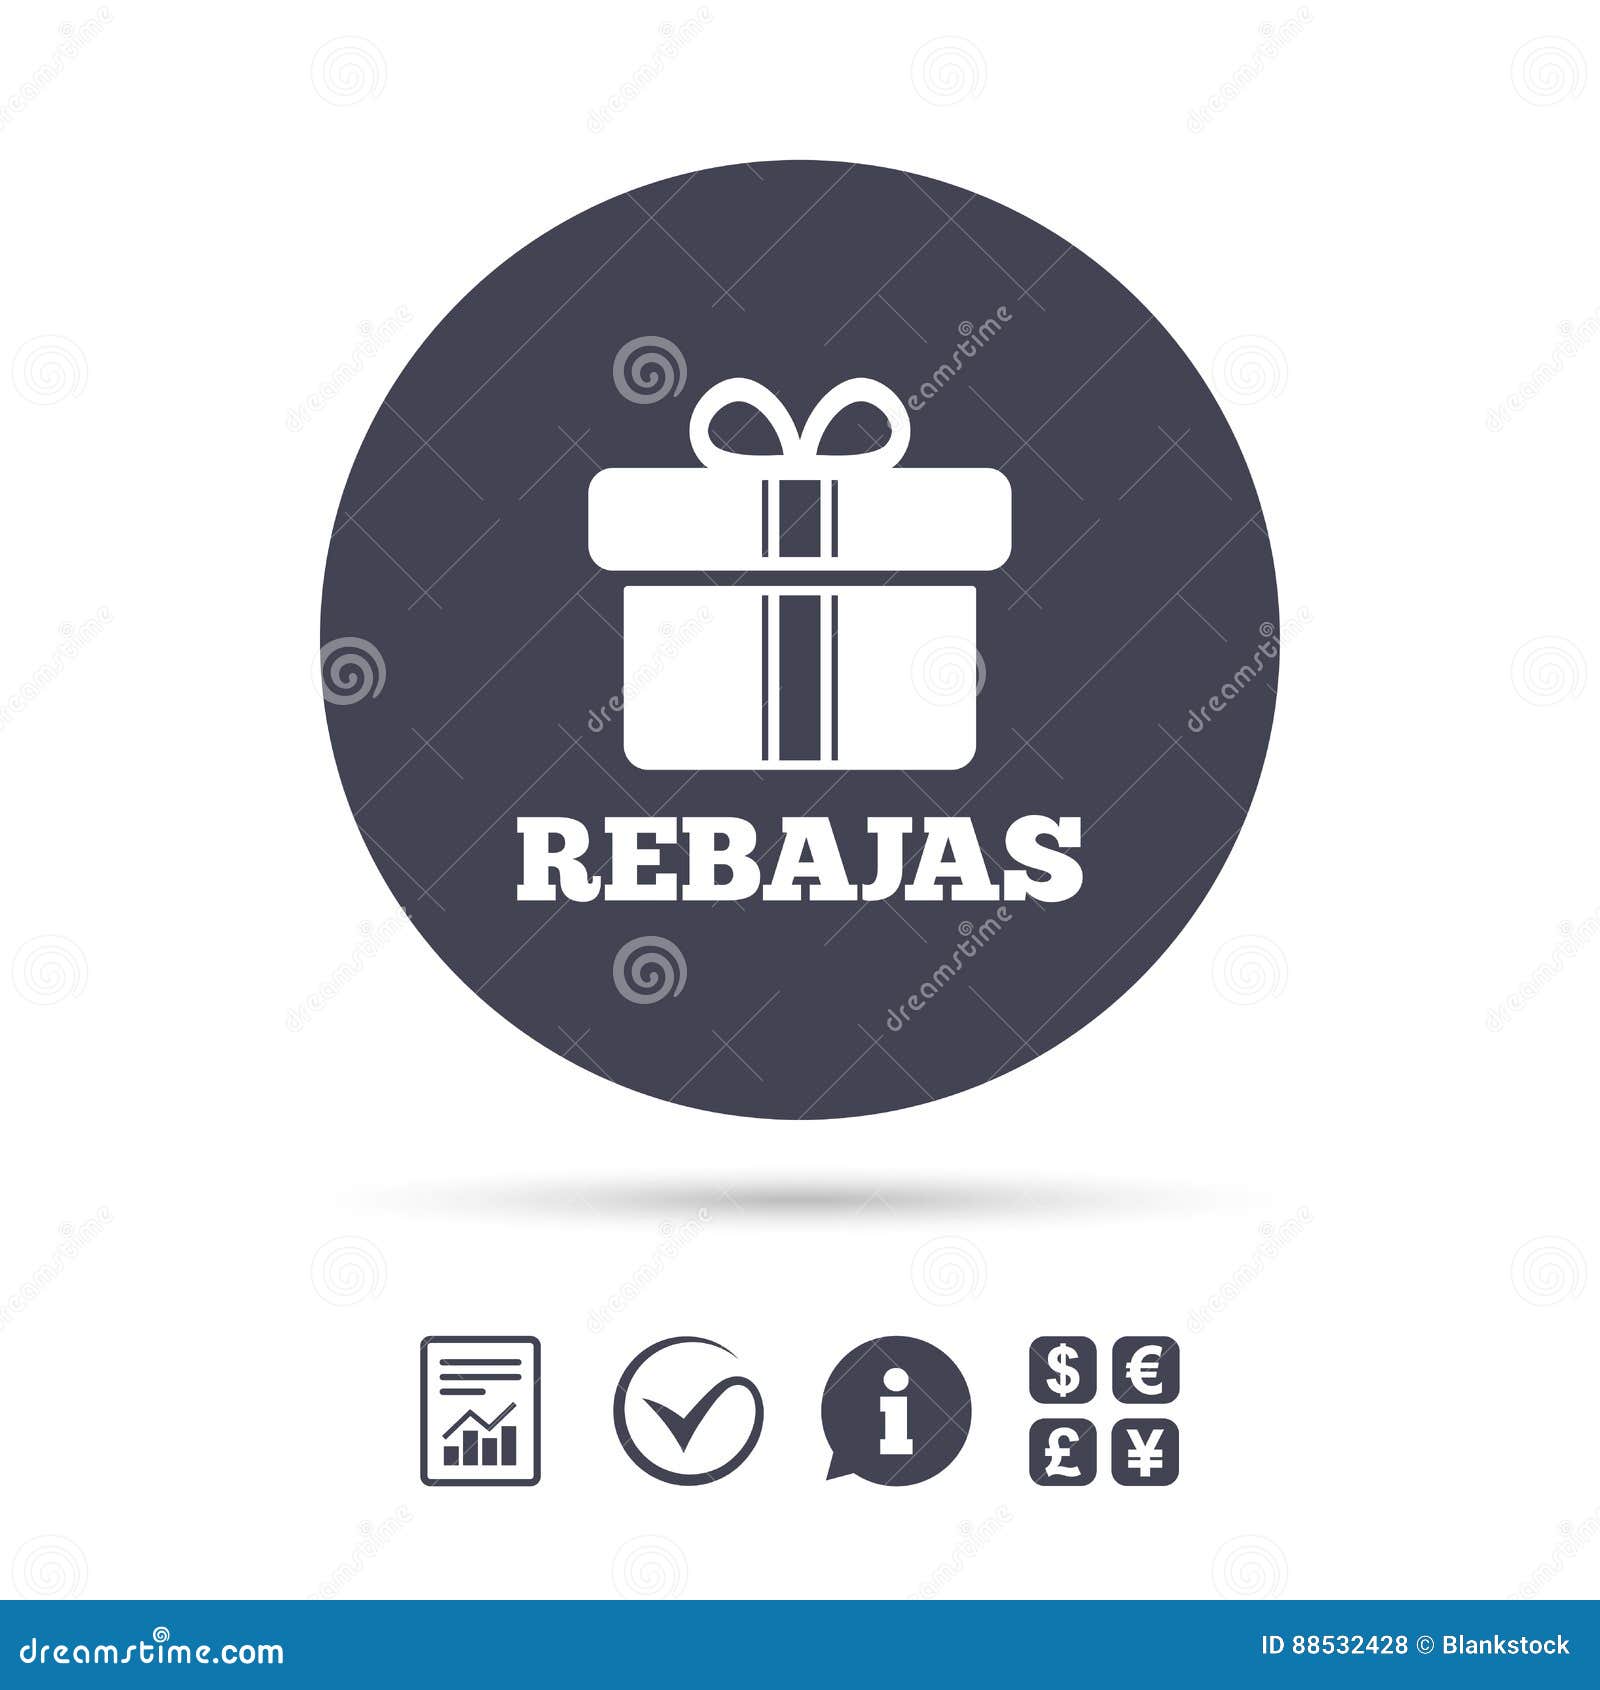 rebajas - discounts in spain sign icon. gift.